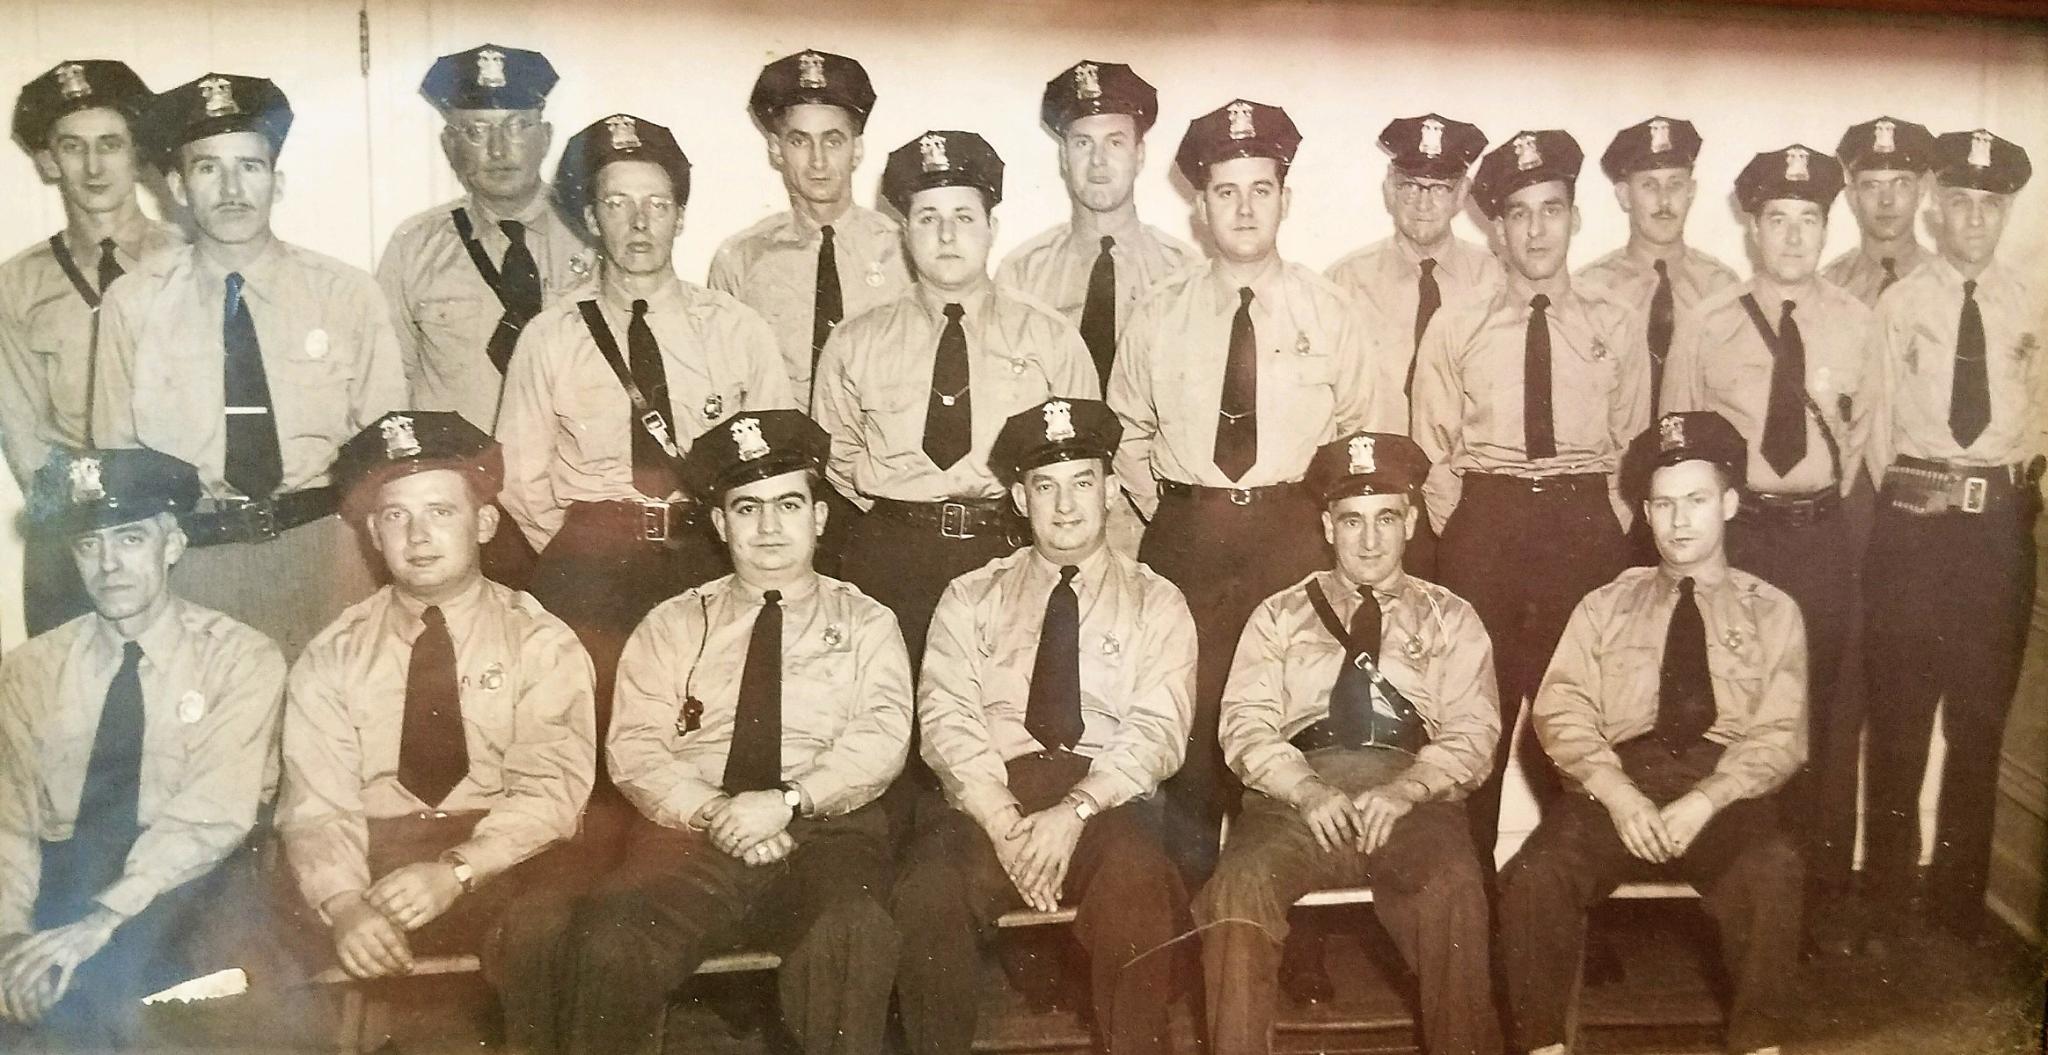 Photo provided by Westfield Police Department Officer Barry Meleen. Pictured is circa 1960s photo of the Westfield policemen, both regular and auxiliary. Only one is identified, that of Robert Peterson (back row, right end with ammunition belt), Meleen's grandfather, who was police chief for many years until his retirement in 1968.